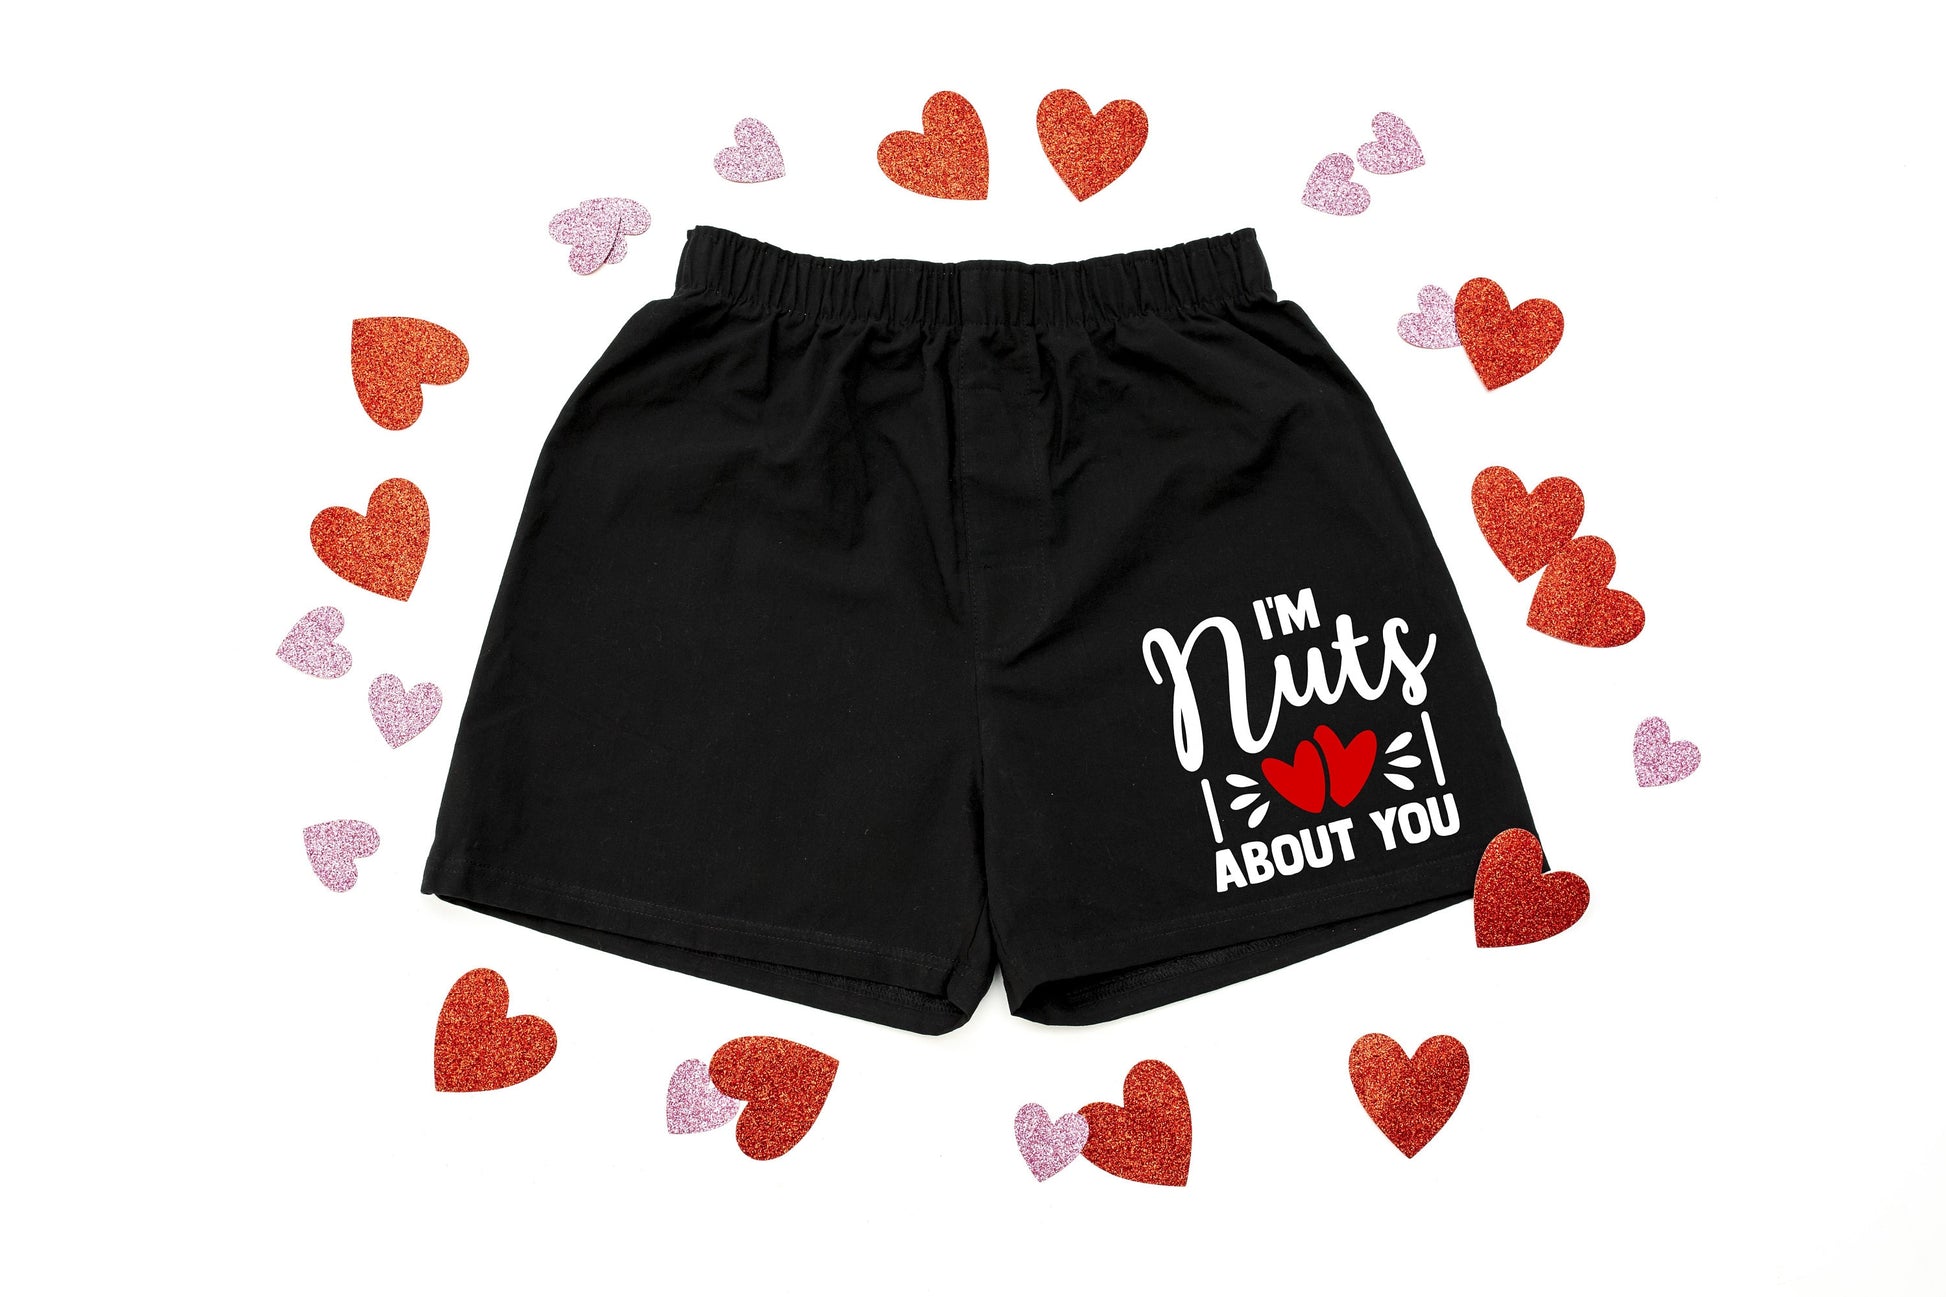 I'm Nuts About You Men's Valentine's Day Cotton Boxer Shorts - False Fly - Gift for Him - Mens Boxers - Funny Boxers - Naughty Boxers